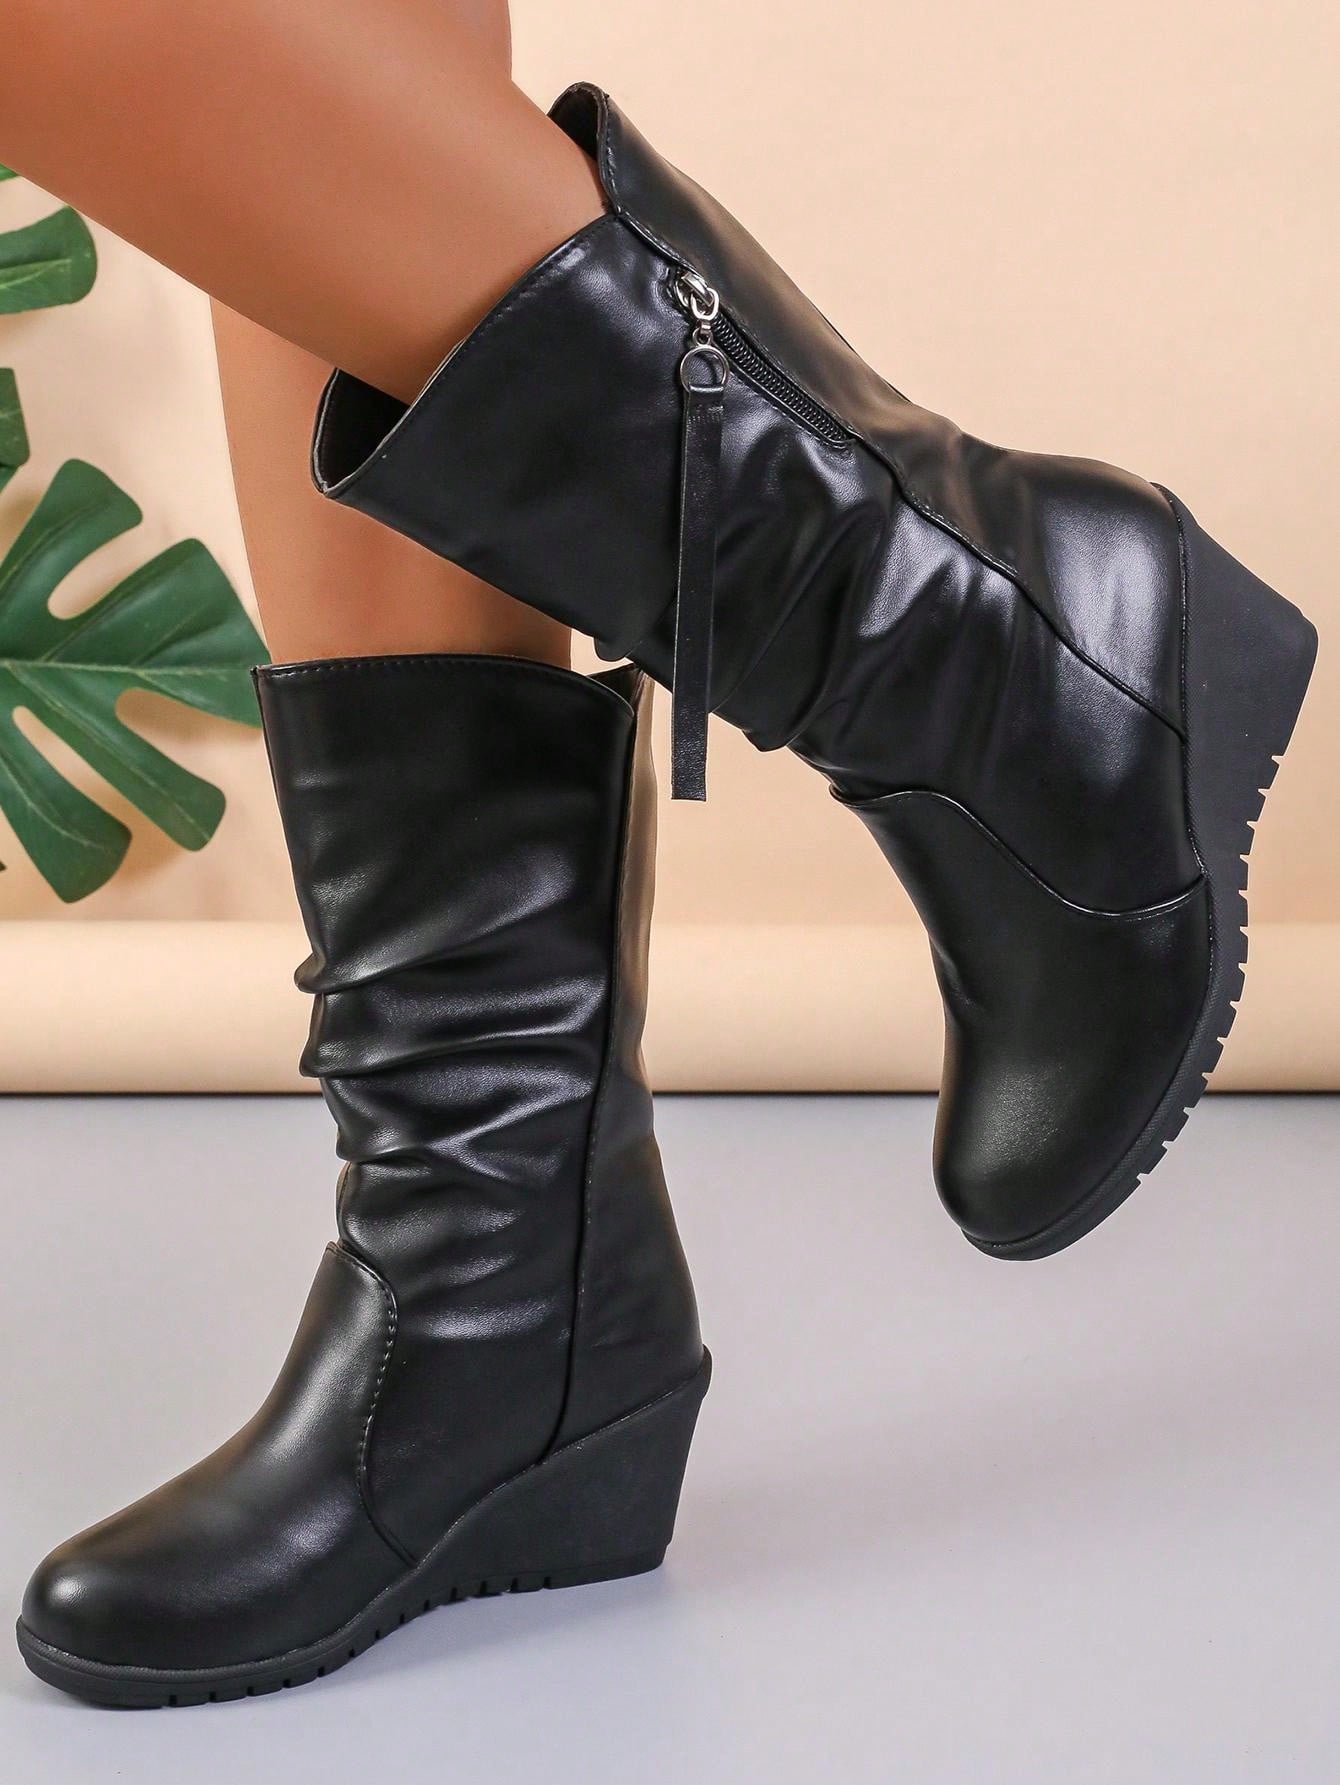 Wedge Heel Women's Calf Boots With Loose Round Toe And Side Zipper, Fashion Boots